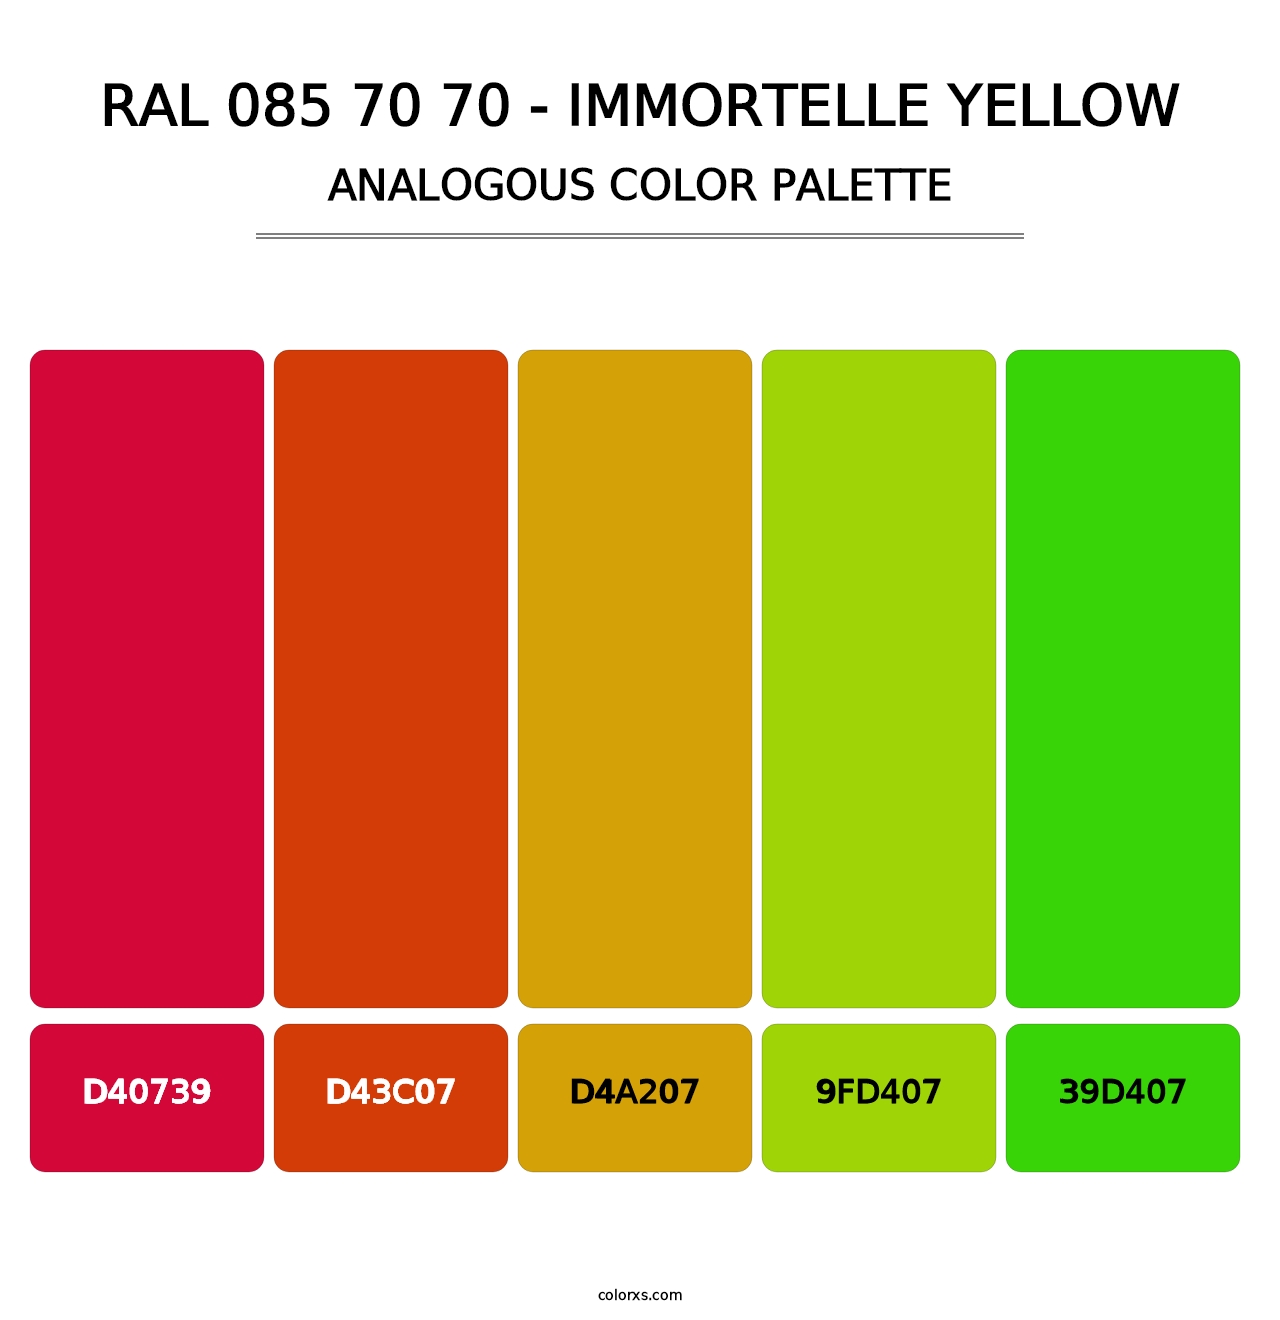 RAL 085 70 70 - Immortelle Yellow - Analogous Color Palette